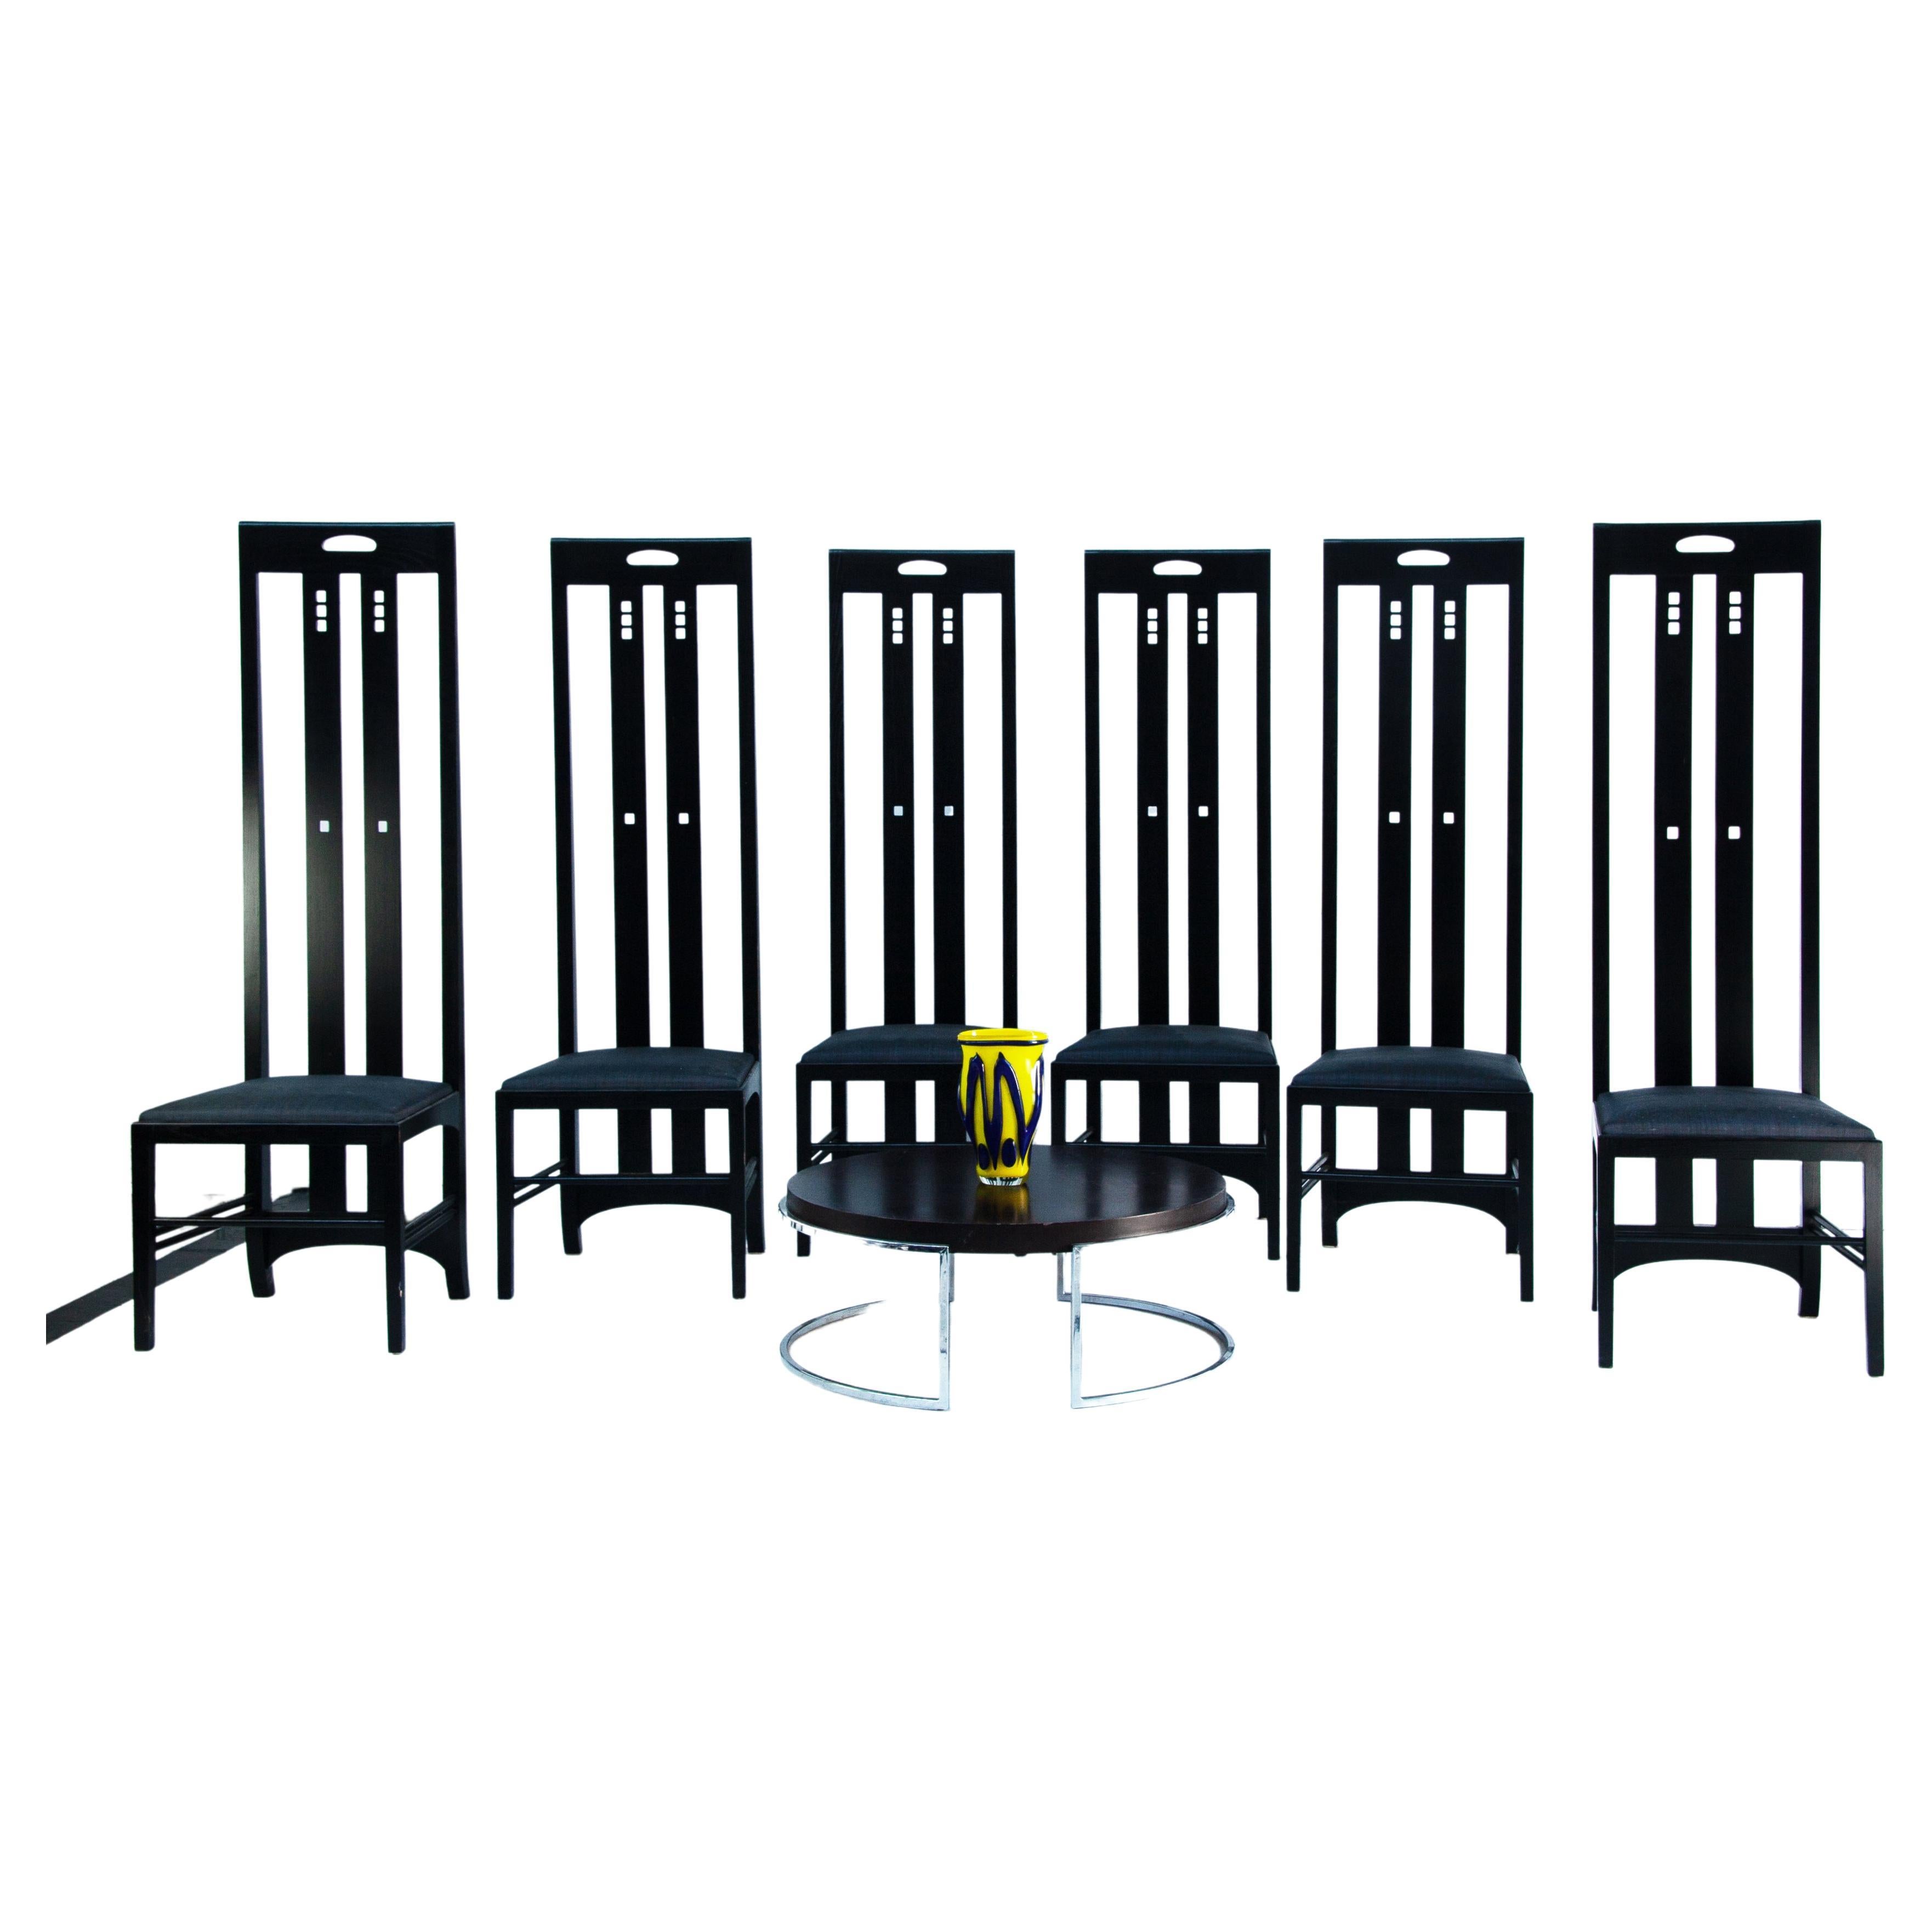 Set of 6 Ingram Dining Chairs by Charles Rennie Mackintosh for Cassina